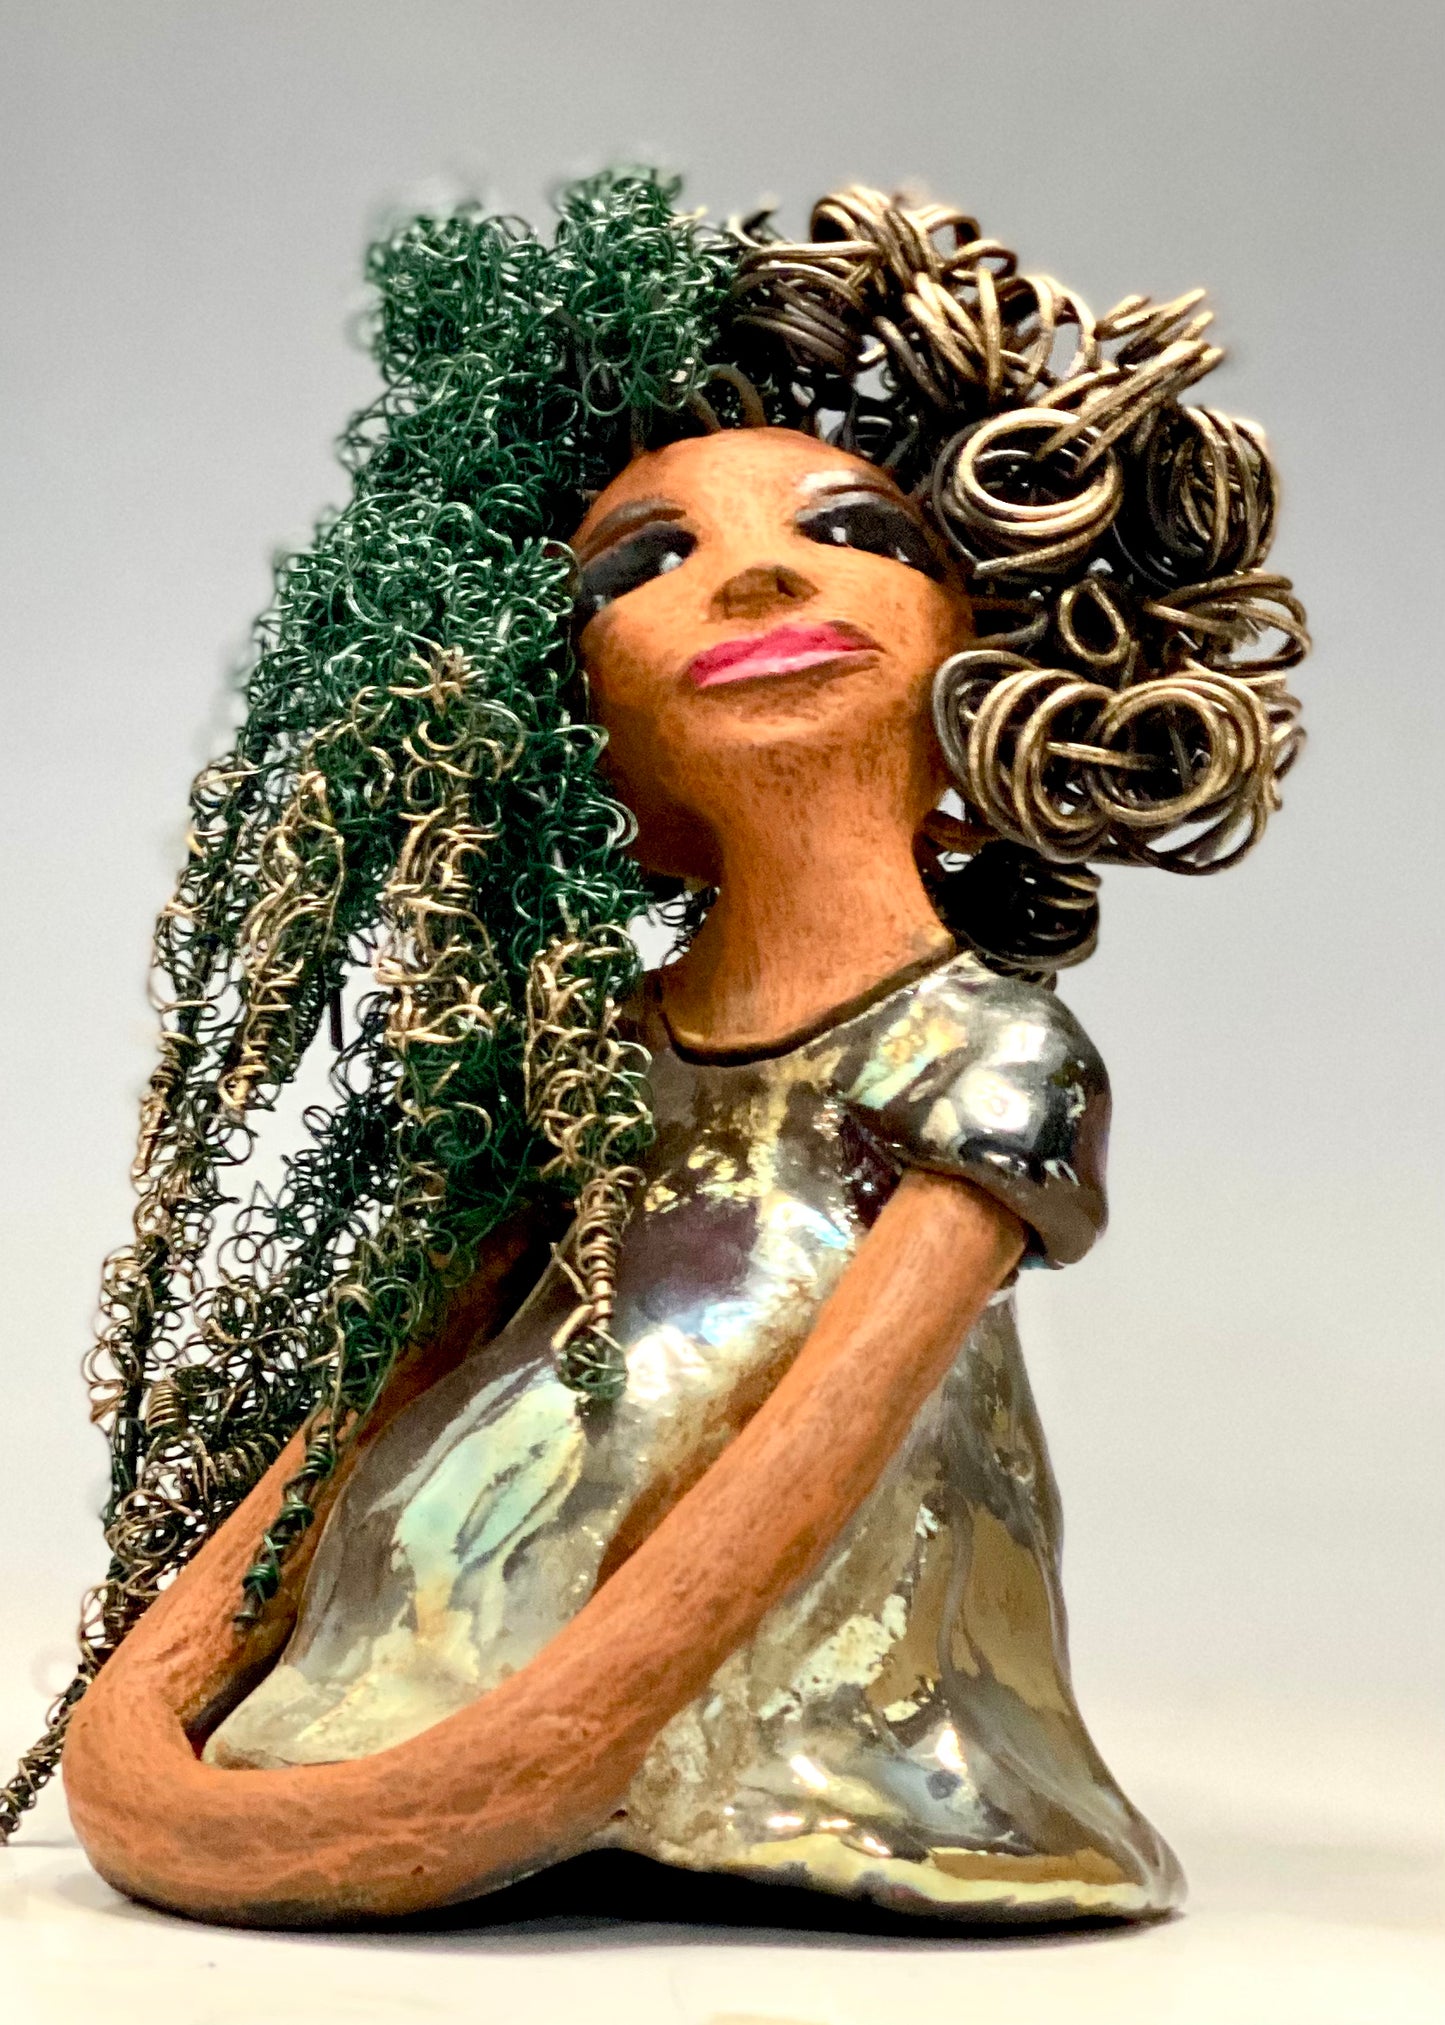 Diane stands 7" x 6" x 5.5" and weighs 1.9 lbs. She has a lovely honey brown complexion with reddish brown lips. She has long twisted wire locs hairstyle waist down!  Diane has a very colorful metallic  copper green antique glazed dress. She has over 75 feet of 16 and 24 gauge  wire for hair. It took over 6 hours just to do her hair! With  eyes wide opened, Diane has hope of finding a new home.